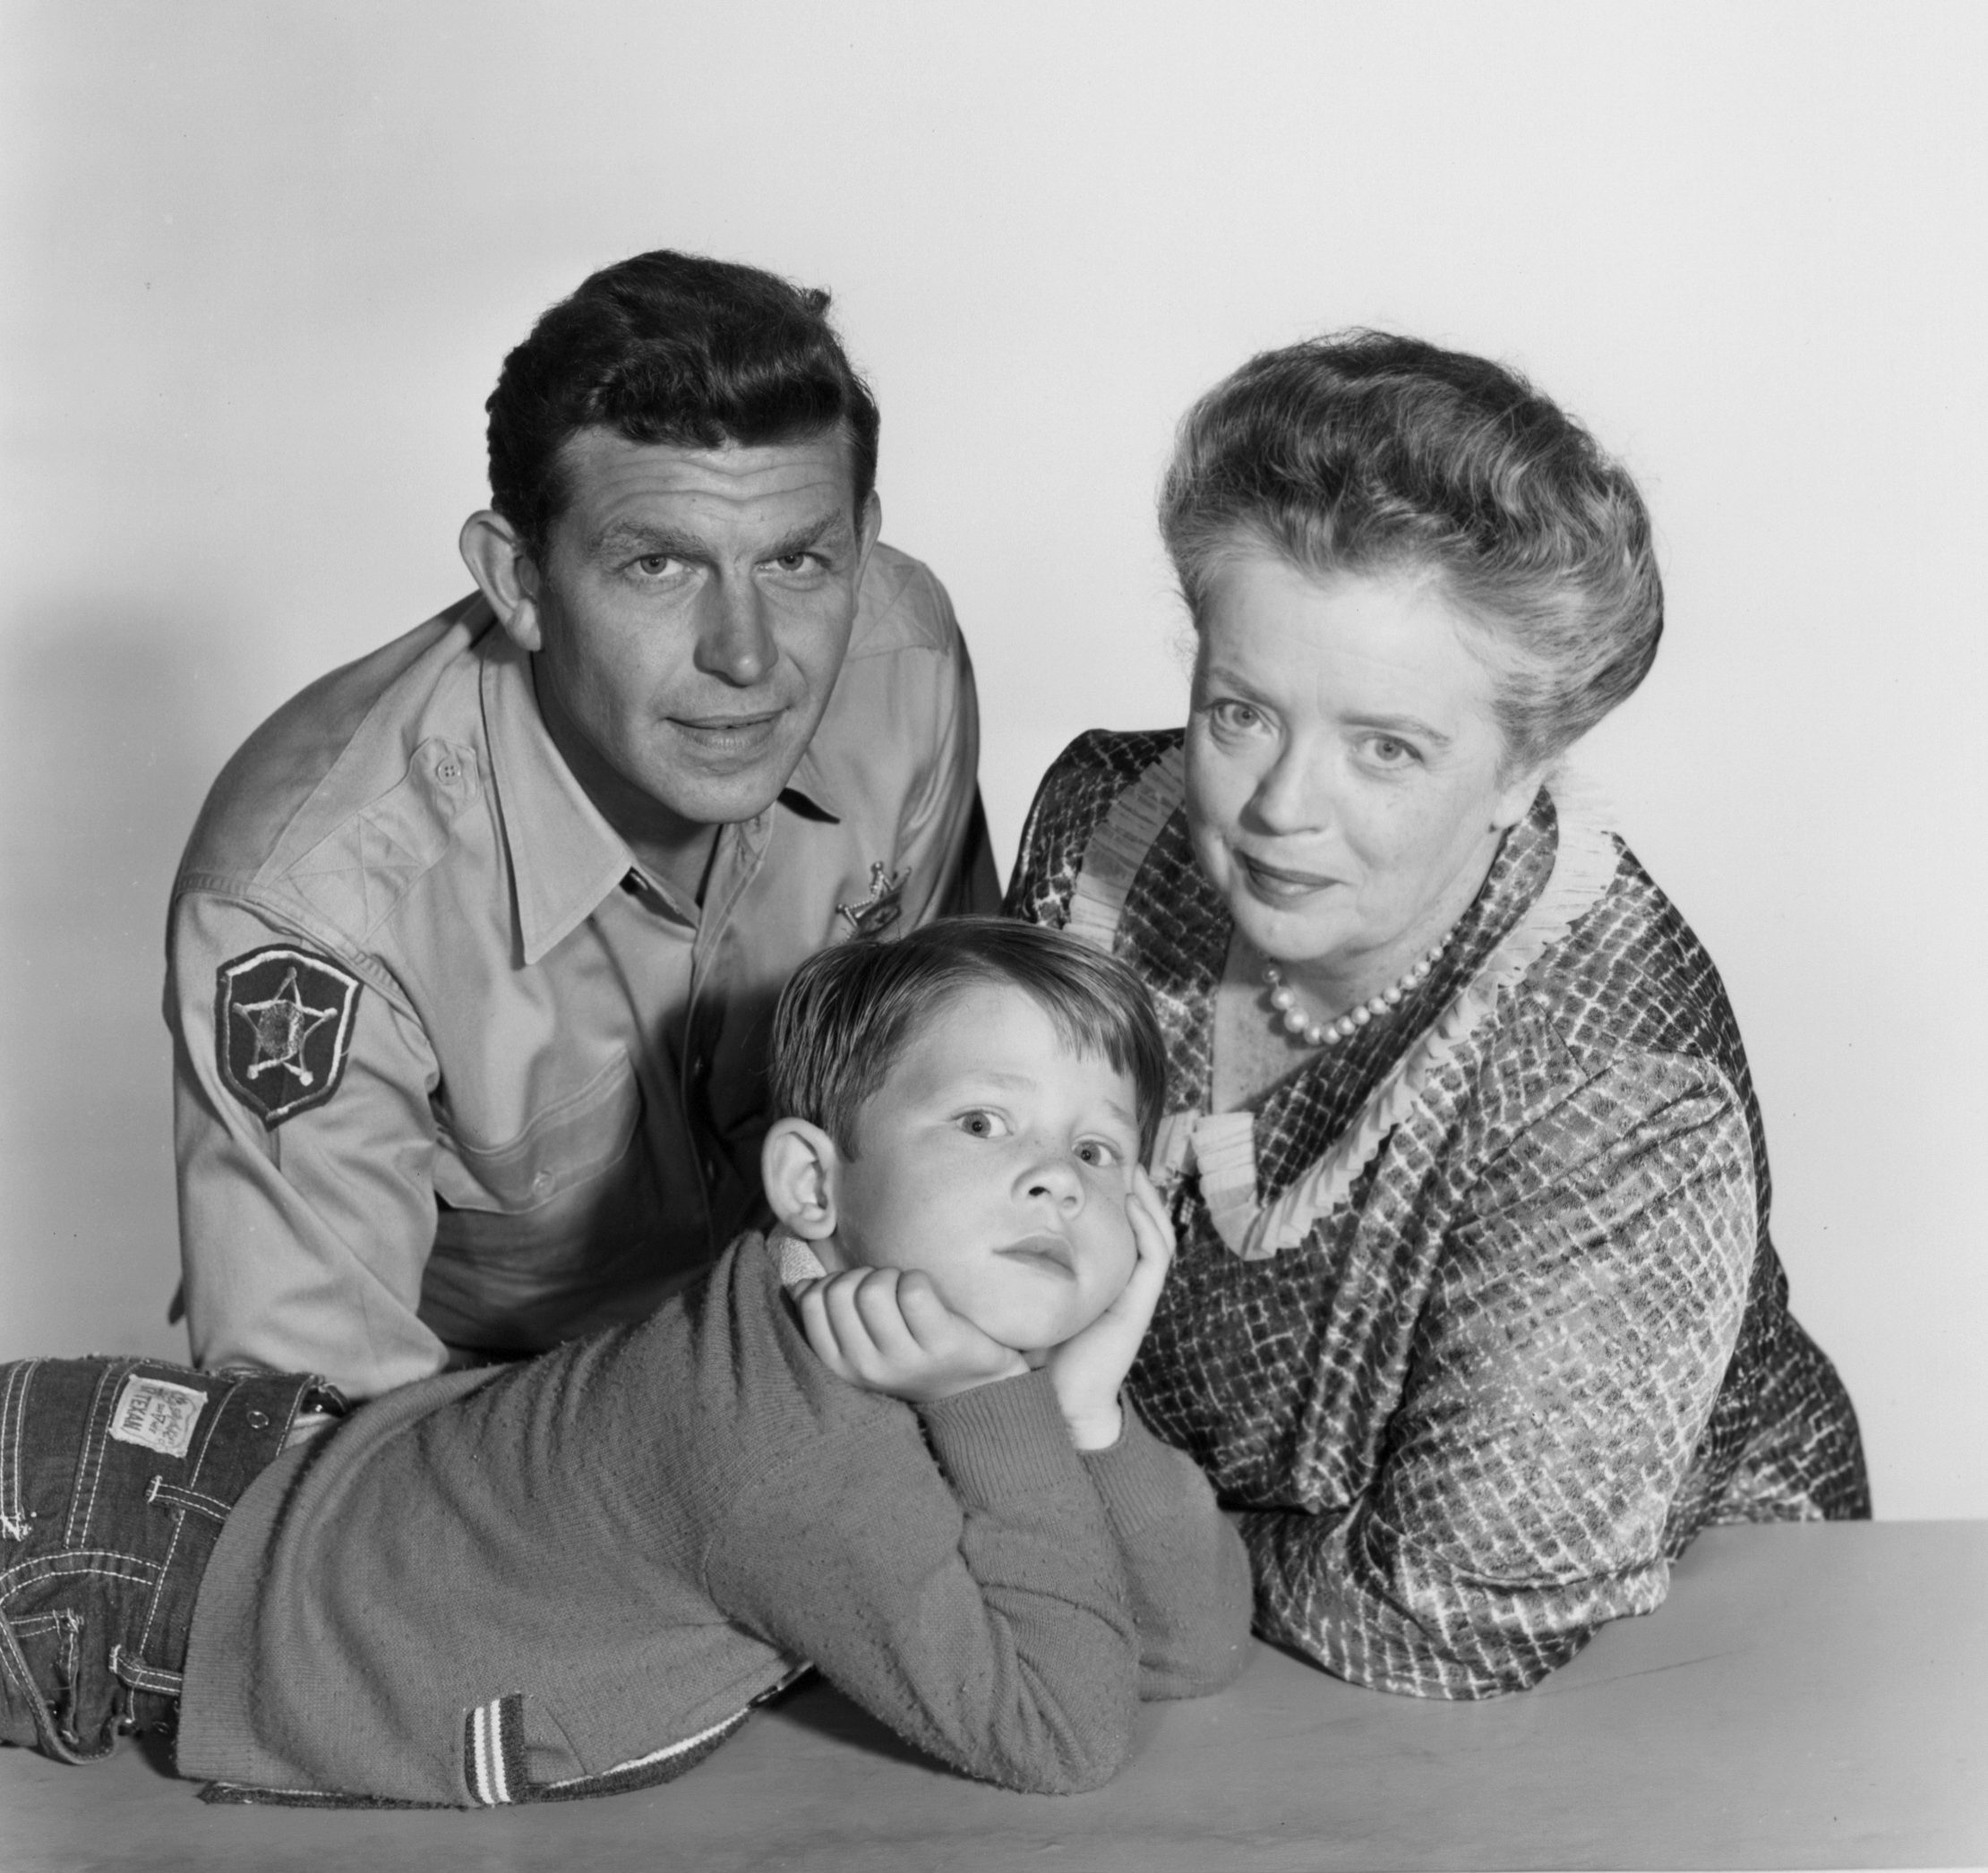 Left to right: Actors Andy Griffith, Ron Howard, and Frances Bavier in a promotional photo for 'The Andy Griffith Show'